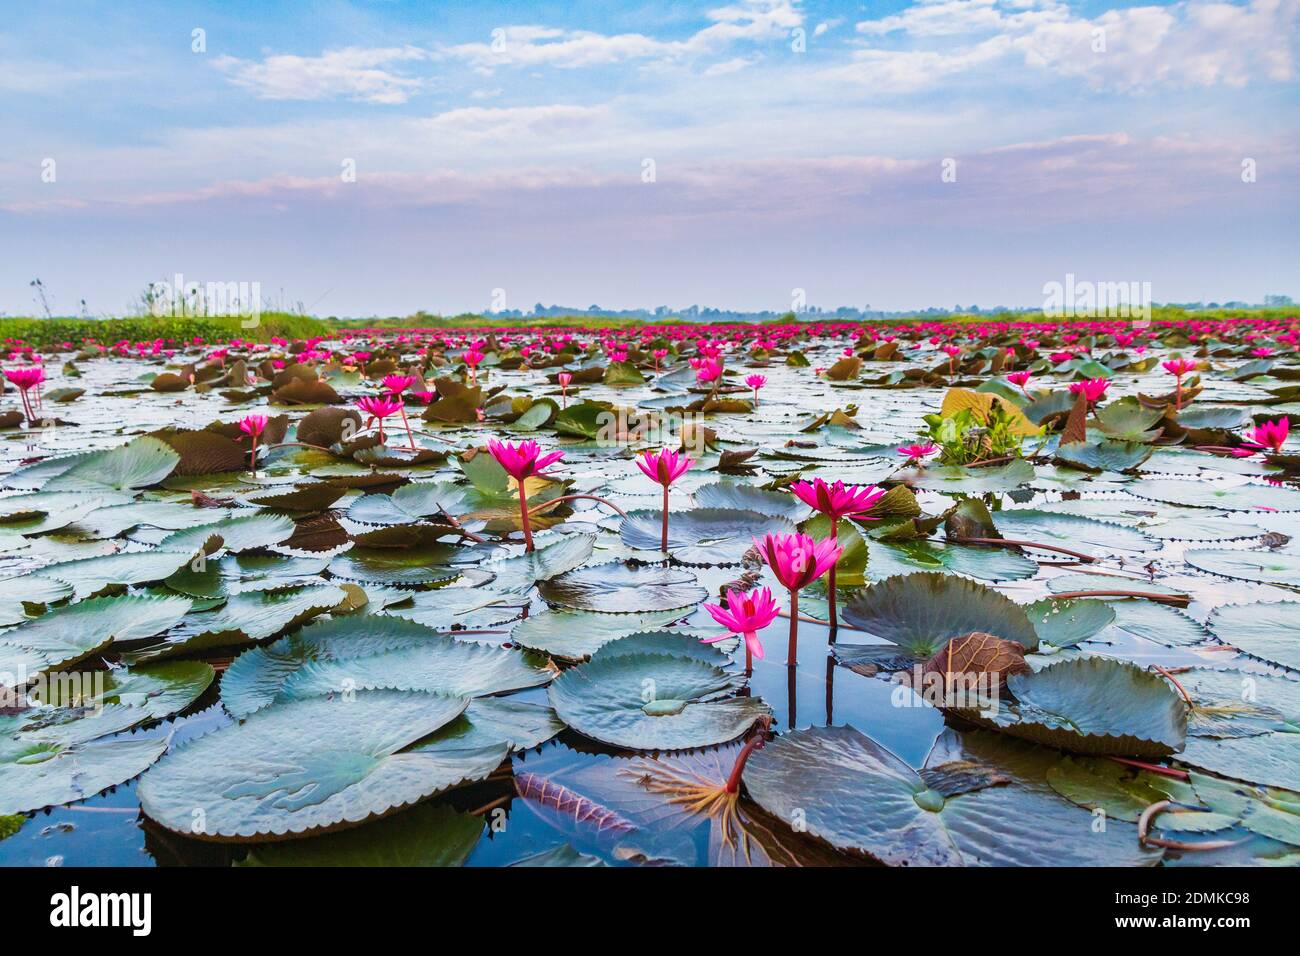 The Sea Of Red Lotus, Lake Nong Udon Thani, Thailand Stock Photo - Alamy